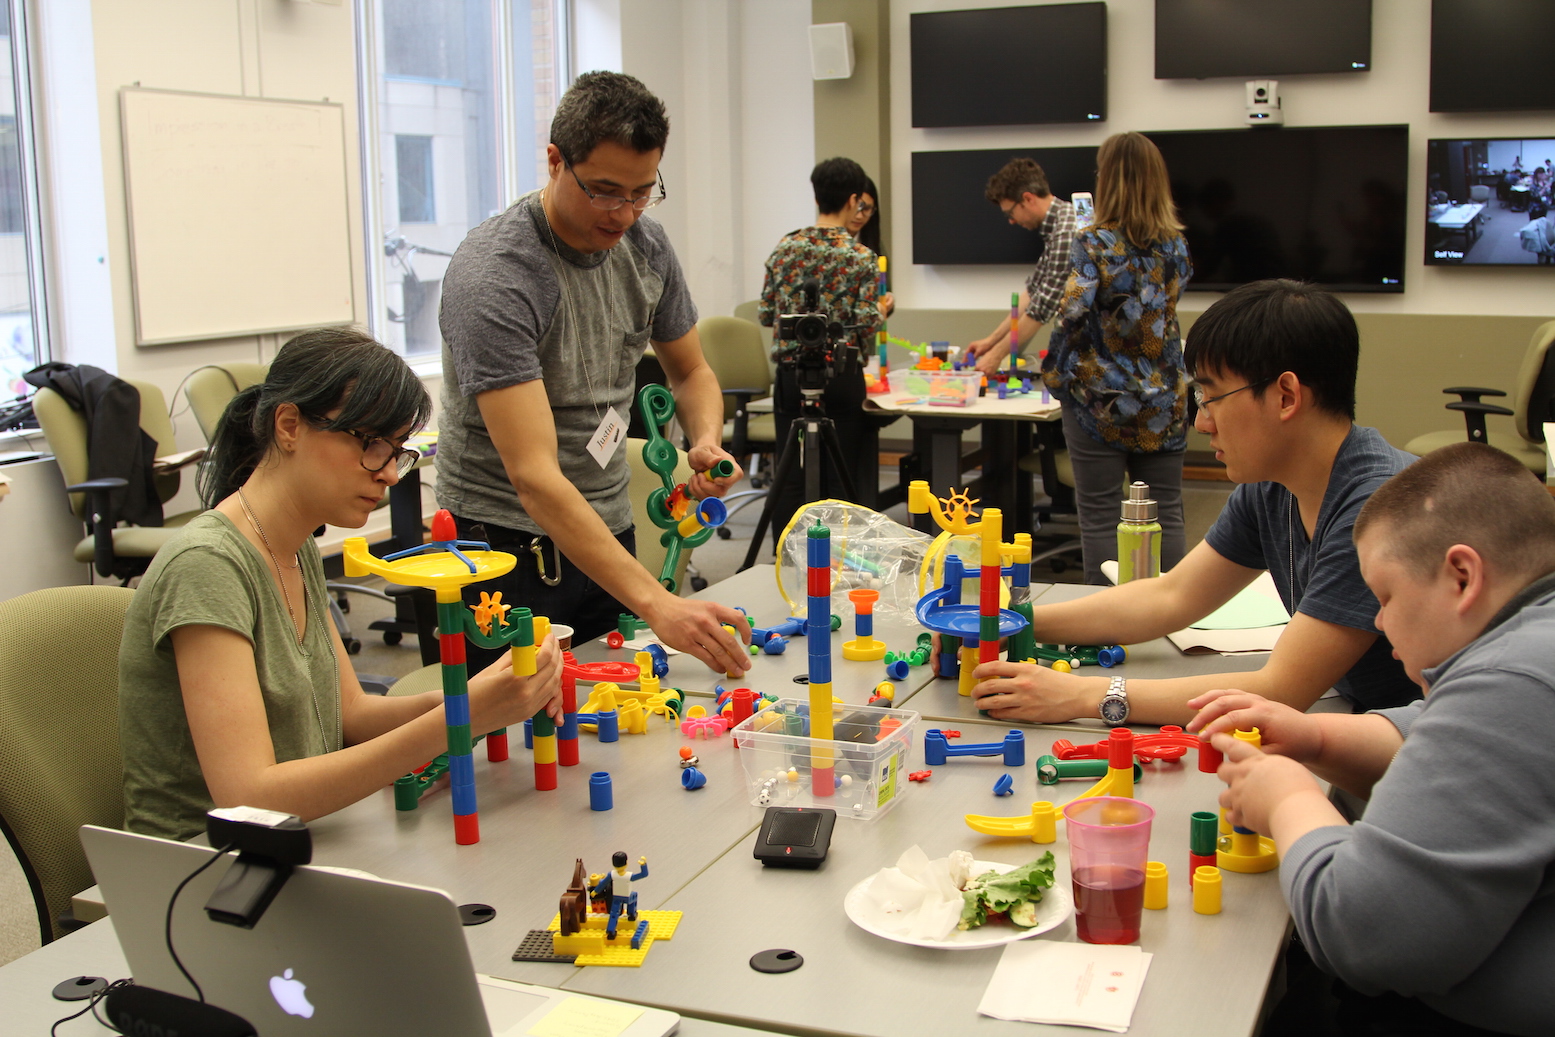 An image showing a group of four people participating in a Create-a-Thon, using building
toys.